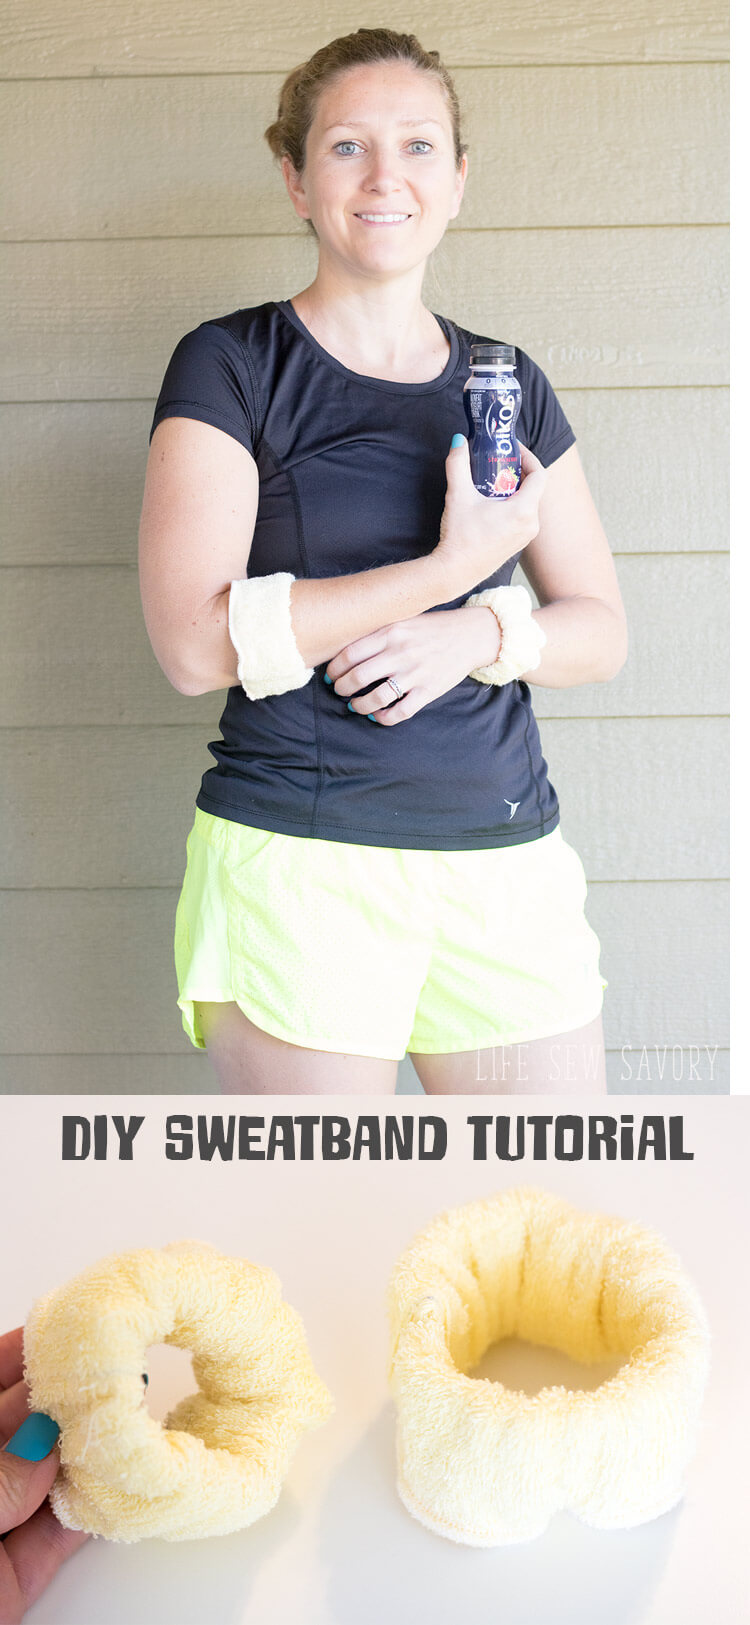 Diy fitness sweatbands from Life Sew Savory